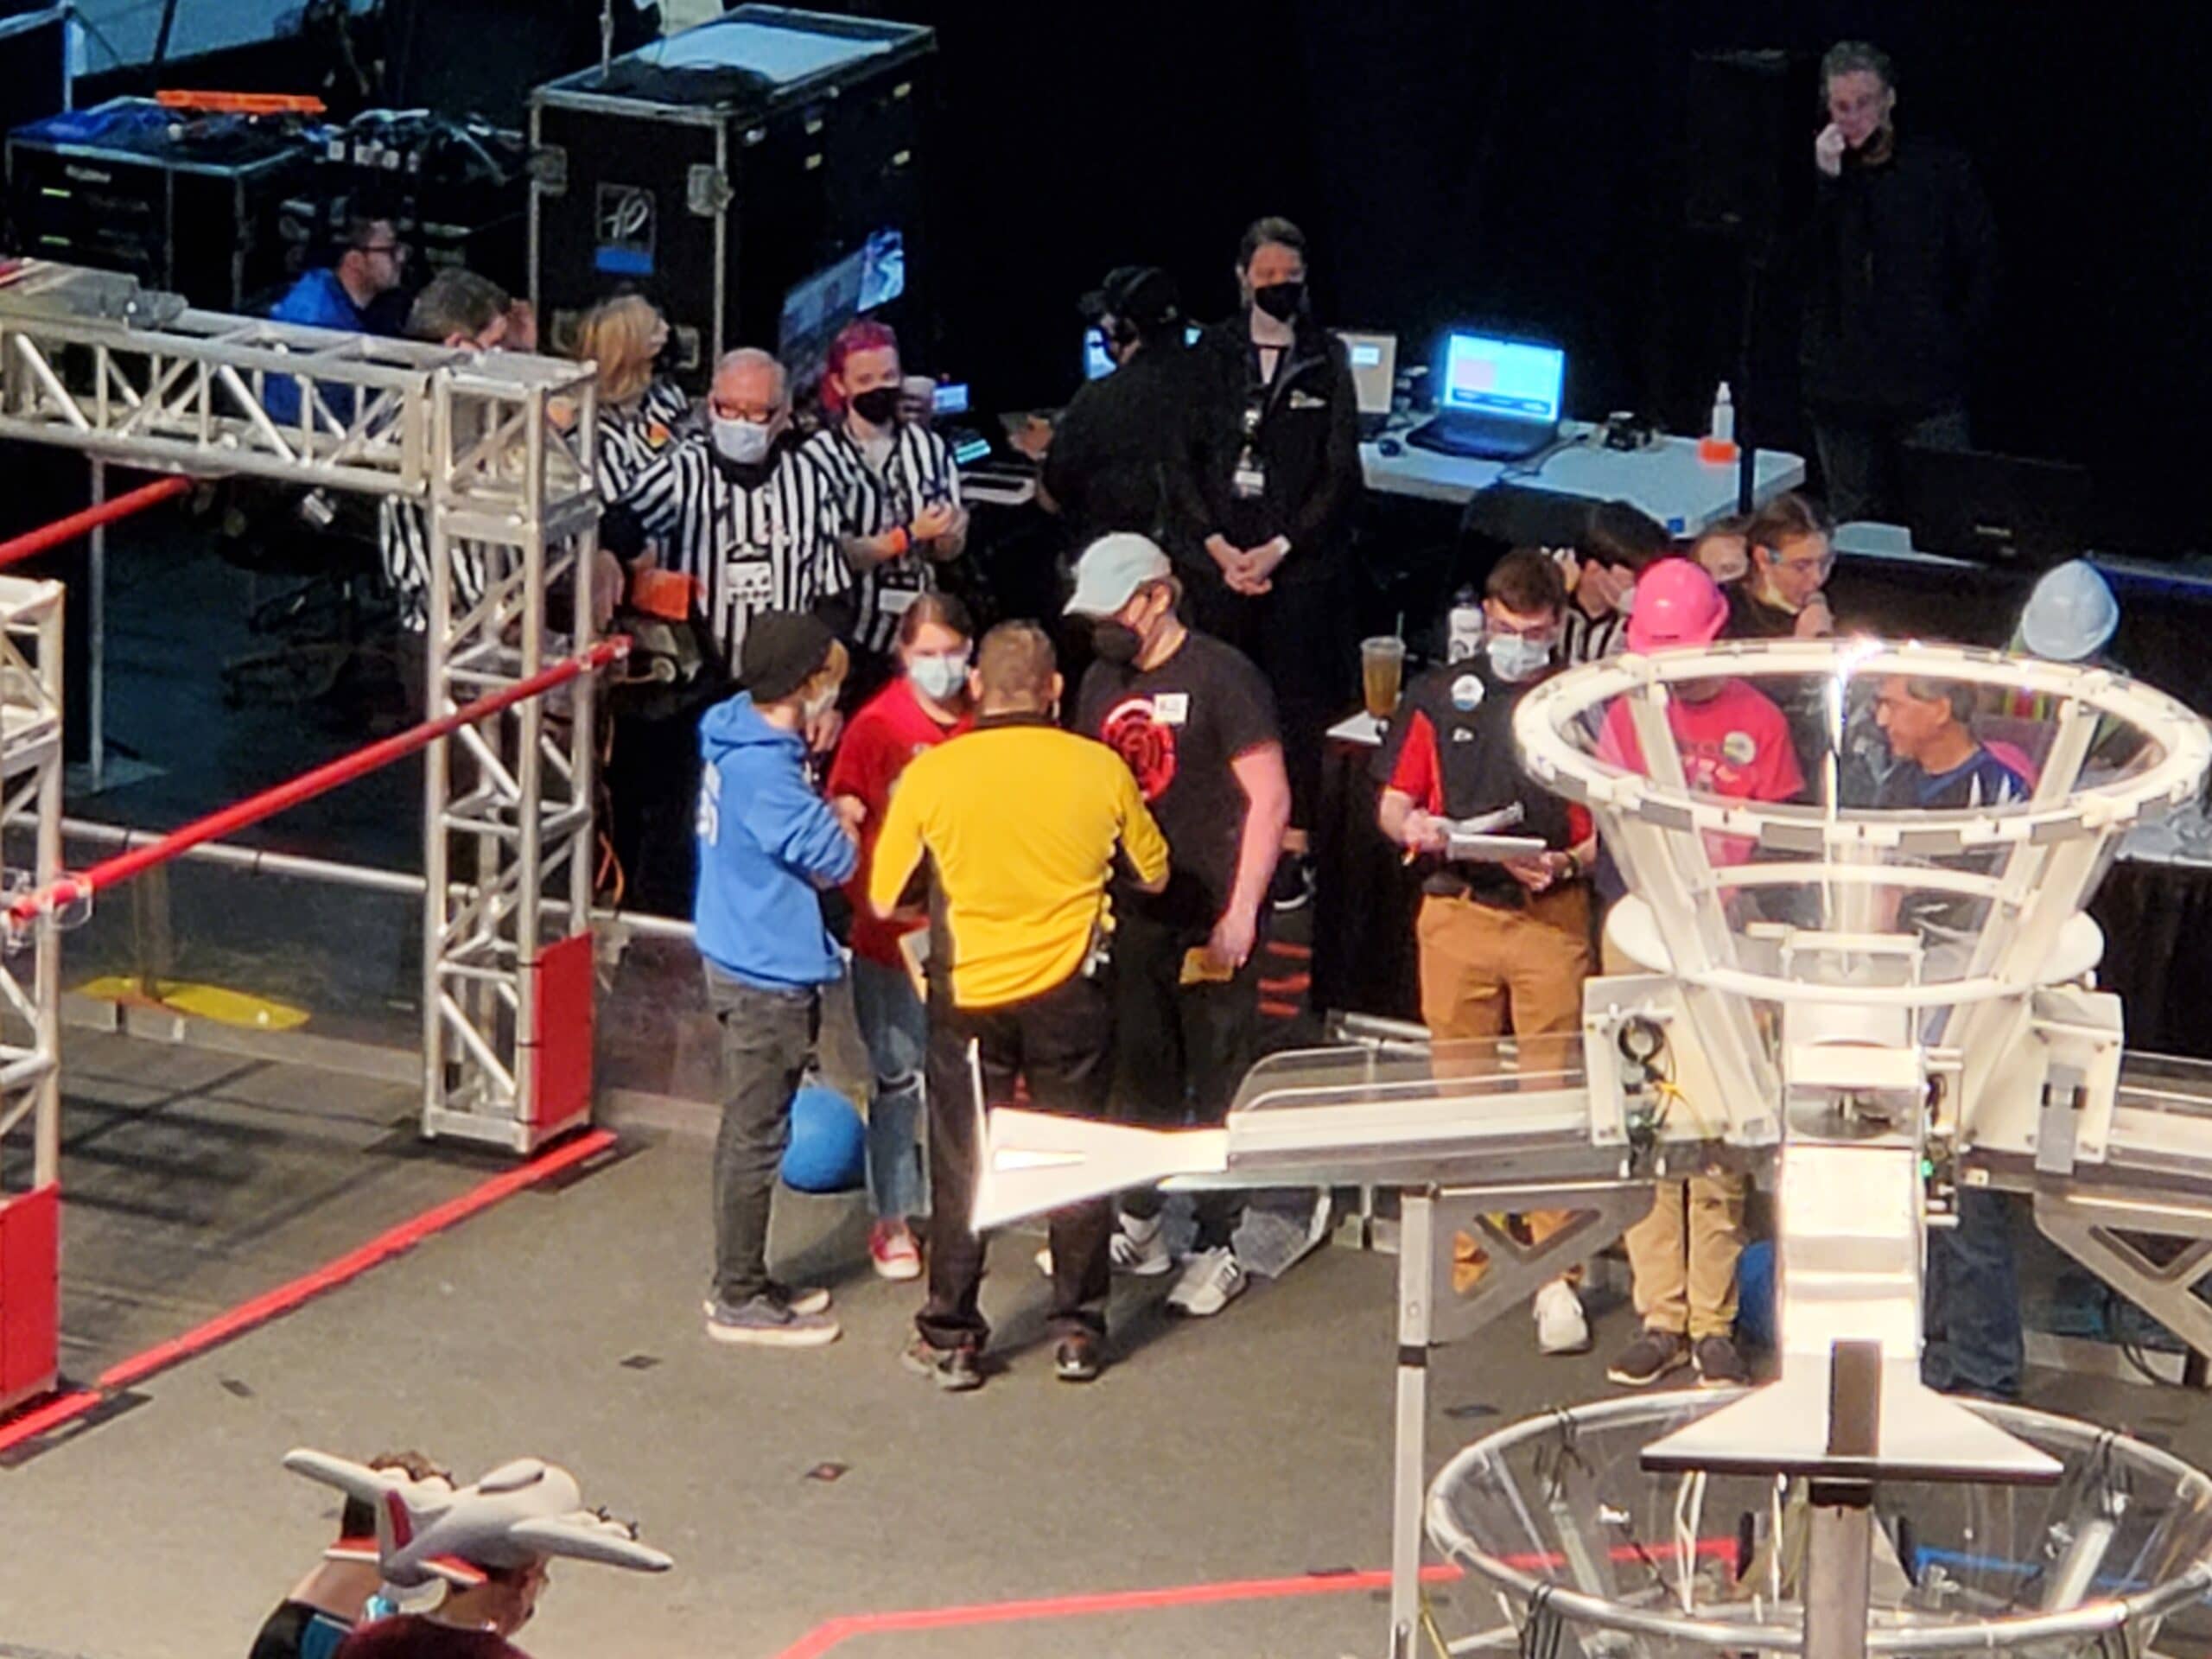 Getting Instructions with our Alliance Partners for the Elimination Round